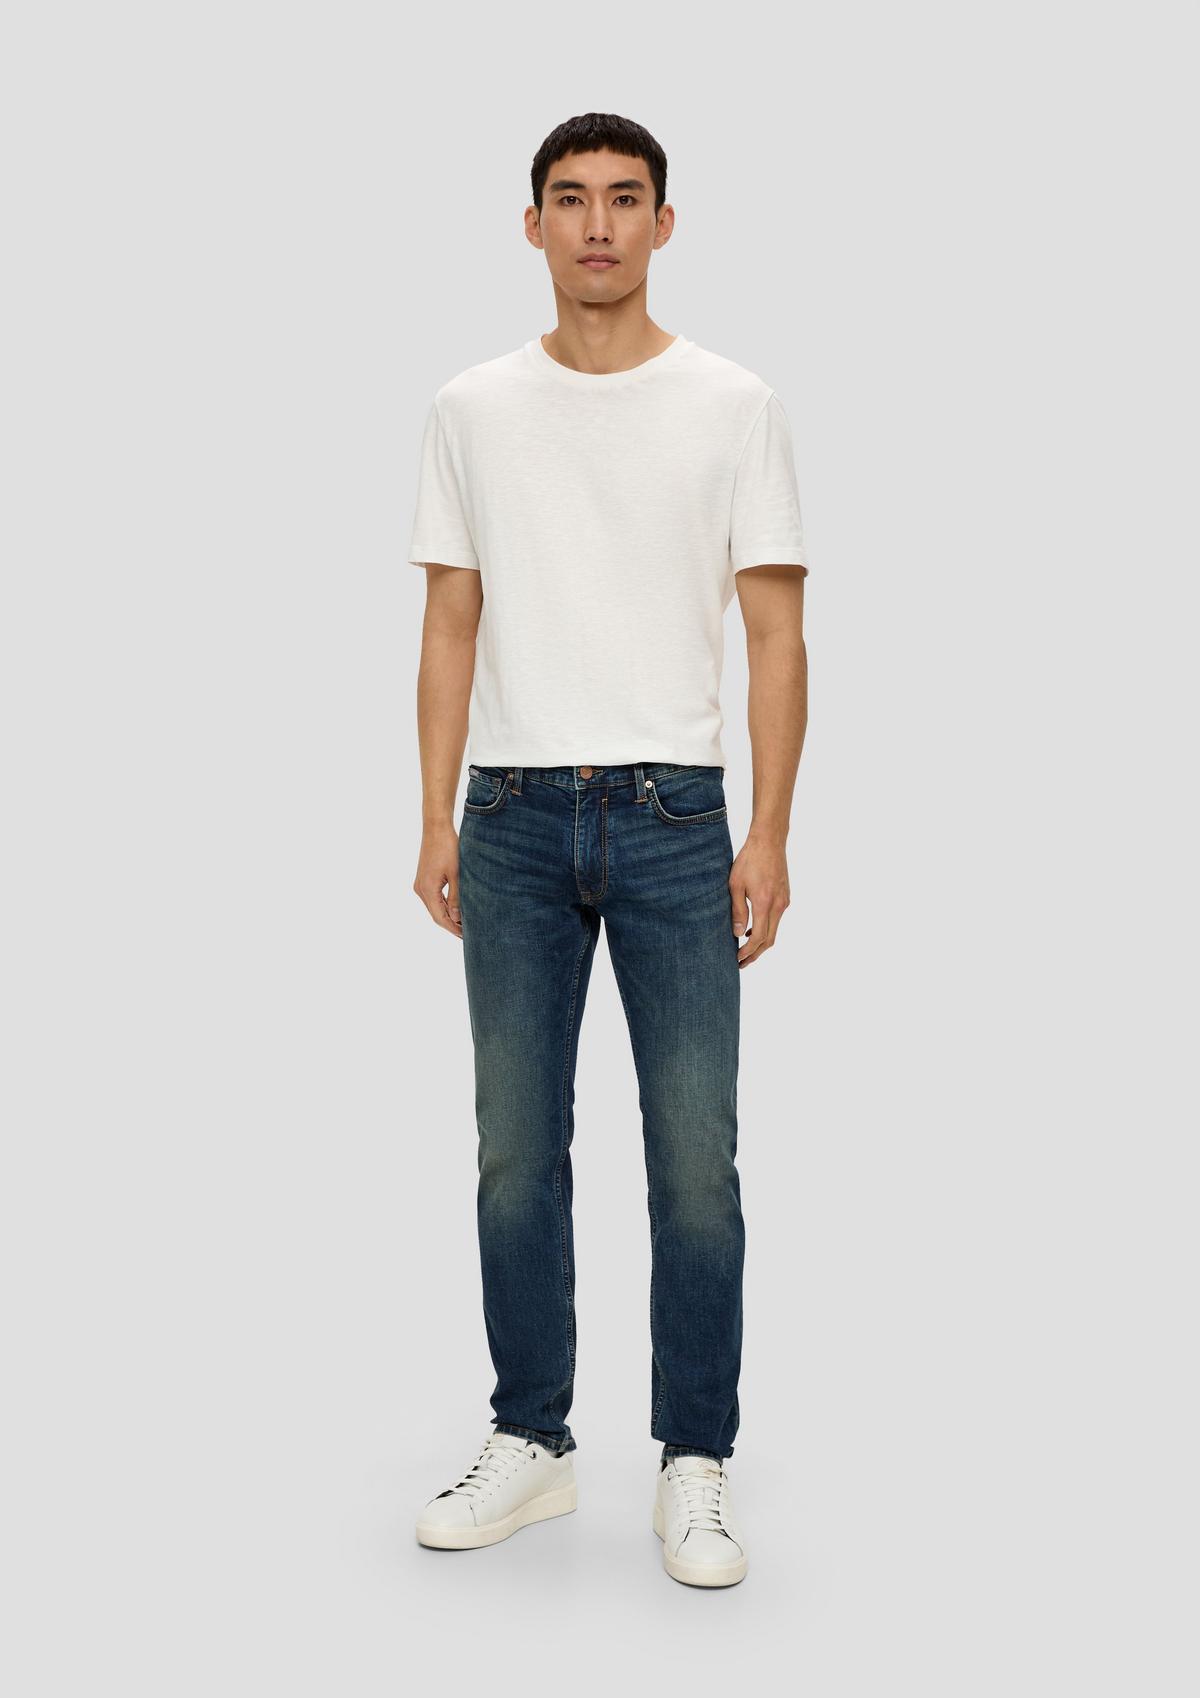 Slim fit: jeans in a 5-pocket style